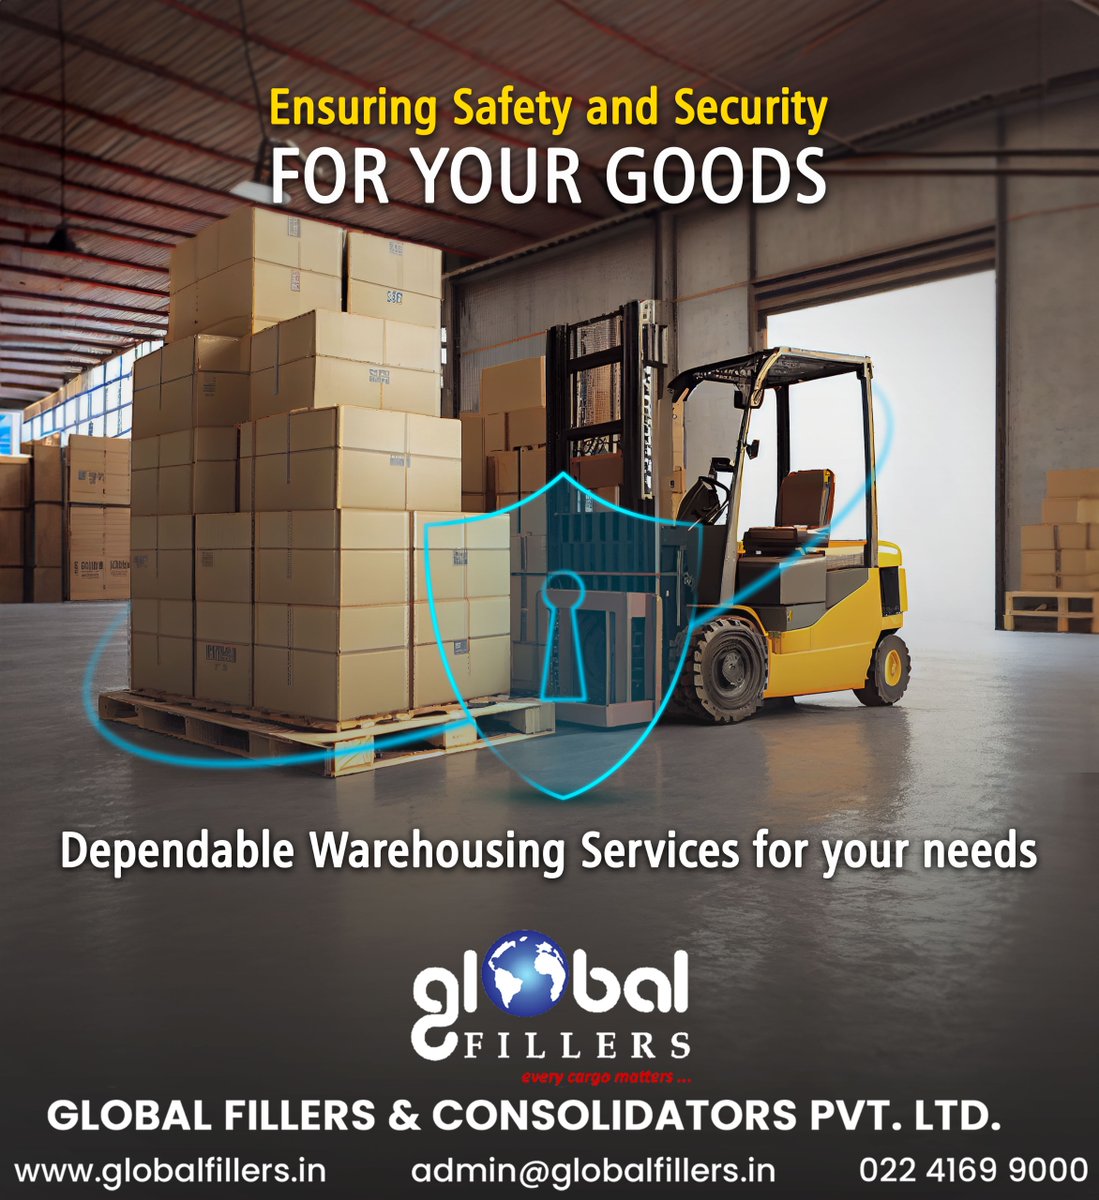 Choose Global Fillers for trustworthy warehousing solutions that prioritize the safety and security of your goods. Depend on us to meet your needs with reliability.

#globalfillers #globalfillersindia #india #indian #supplychain #logistics #logisticsindia #warehousing